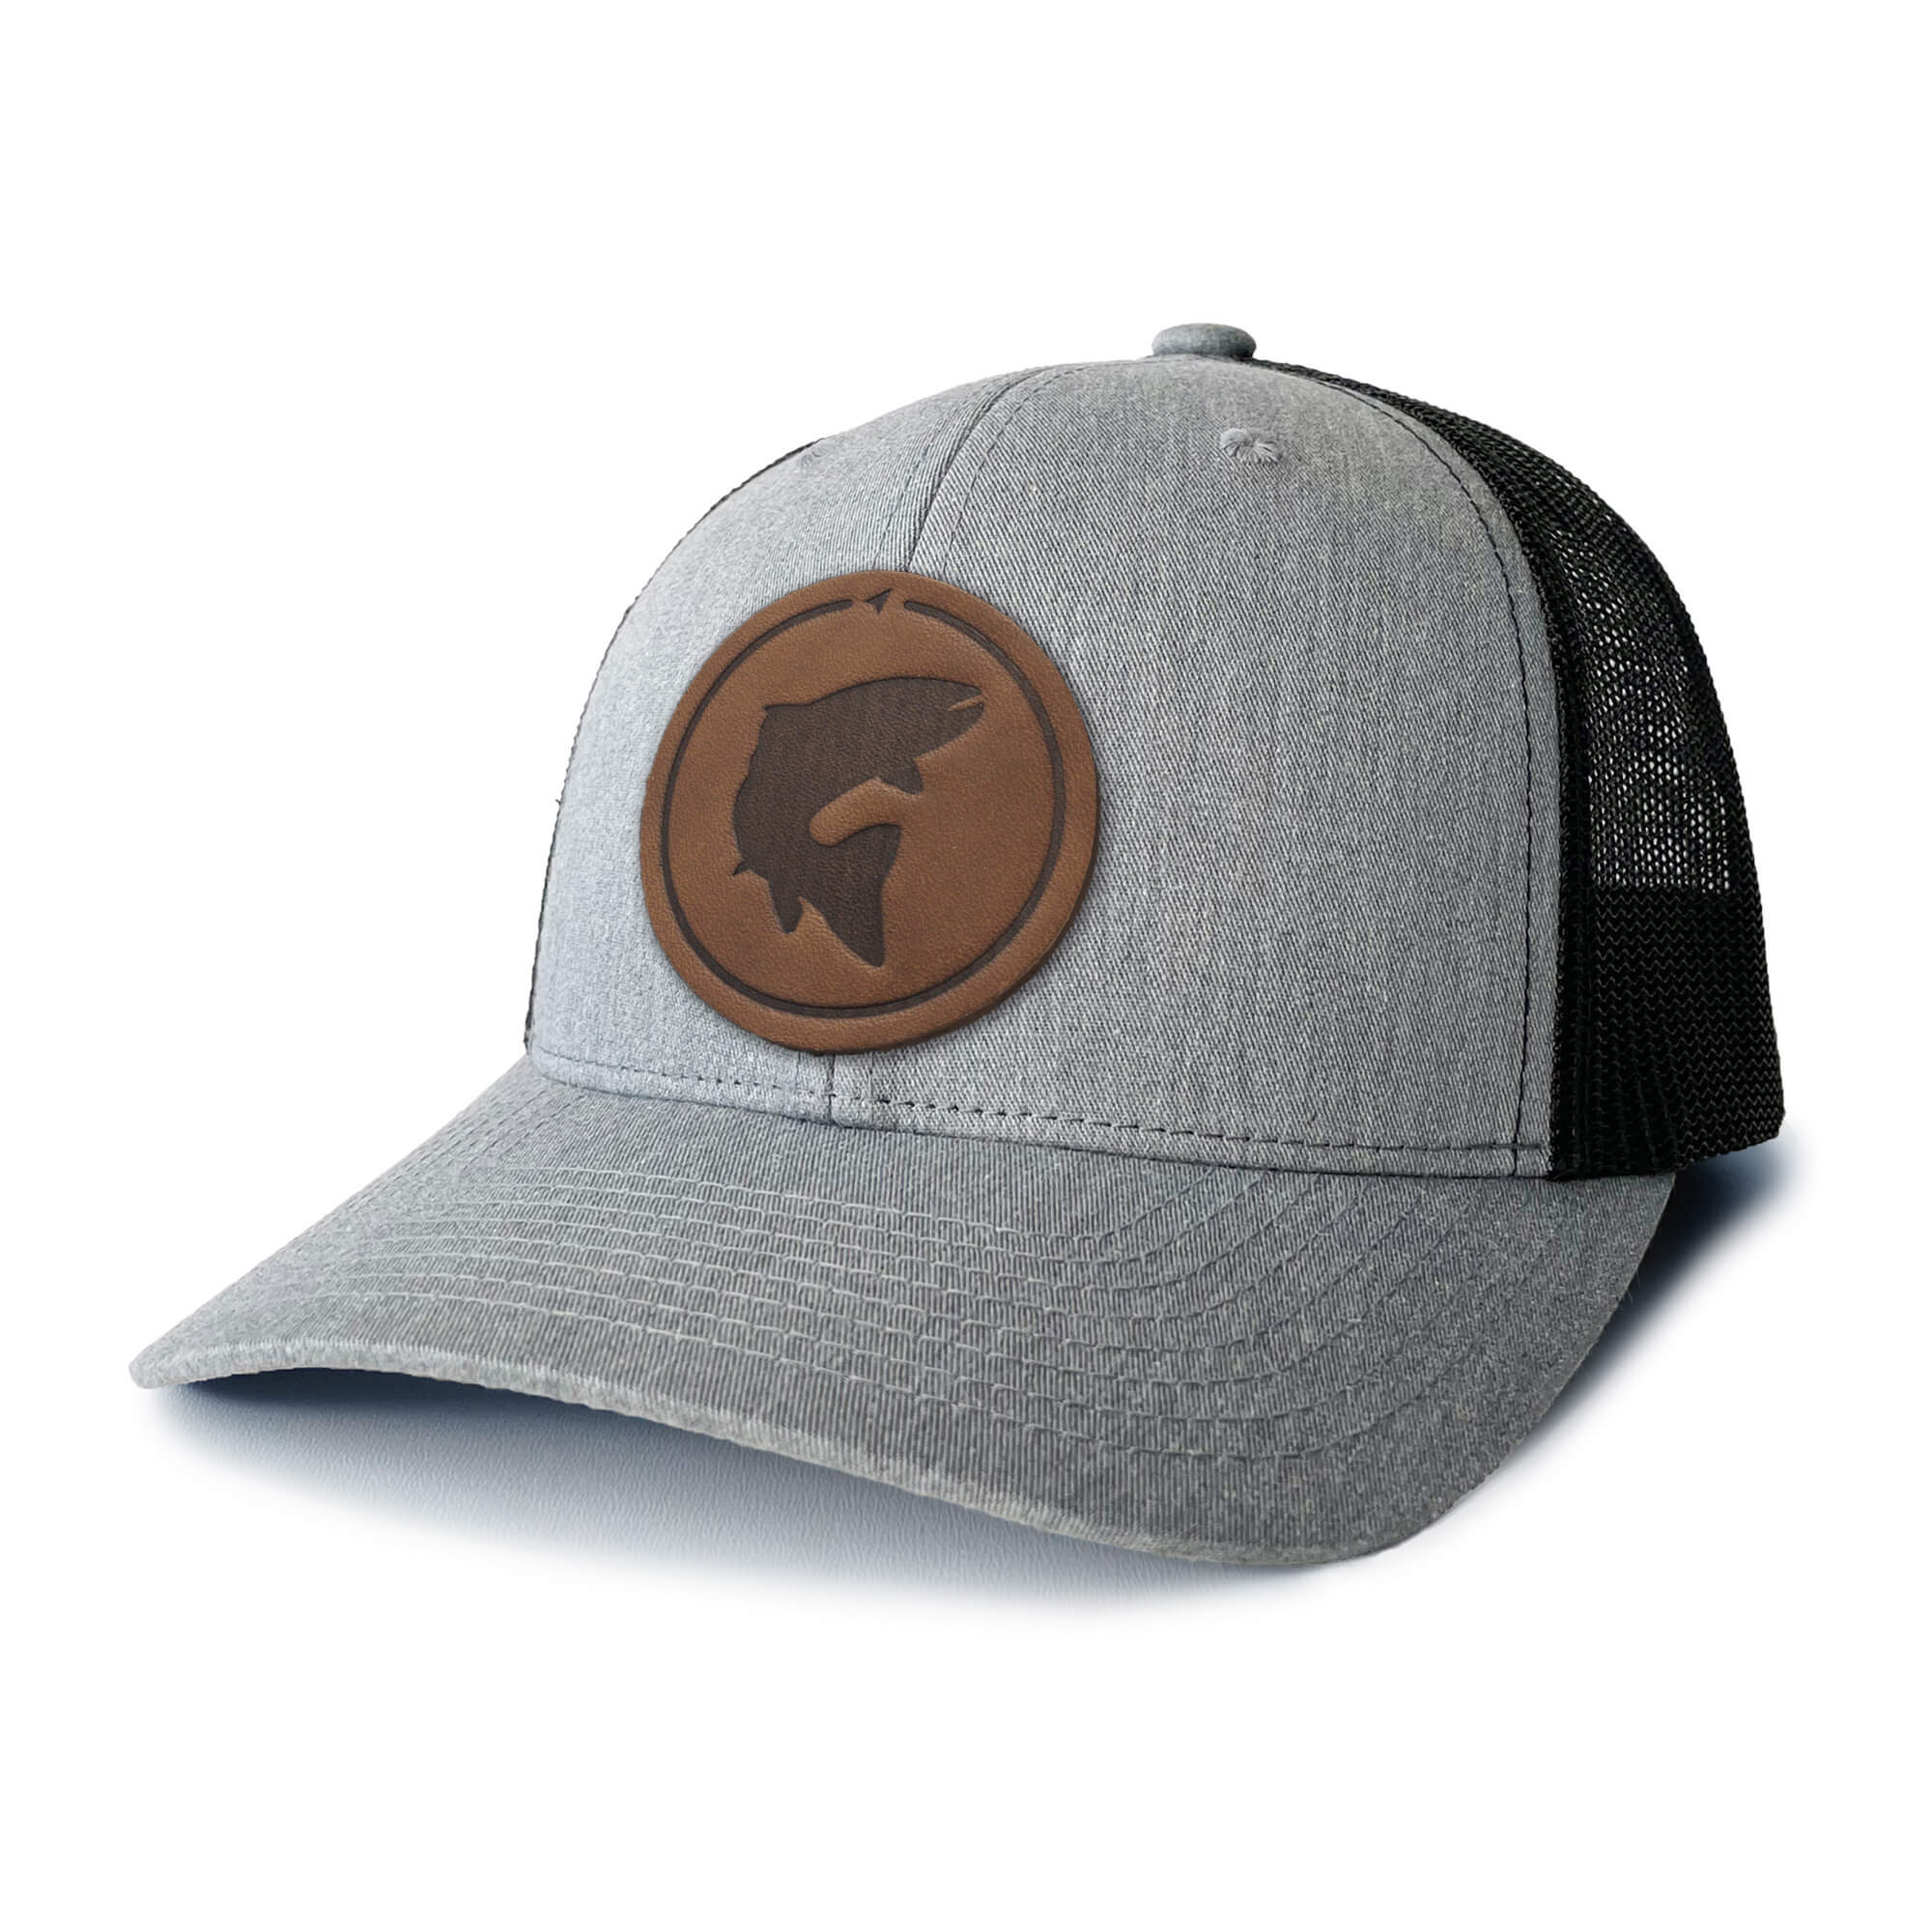 Heather Grey and white trucker hat with full-grain leather patch of a Trout | BLACK-004-001, CHARC-004-001, NAVY-004-001, HGREY-004-001, MOSS-004-001, BROWN-004-001